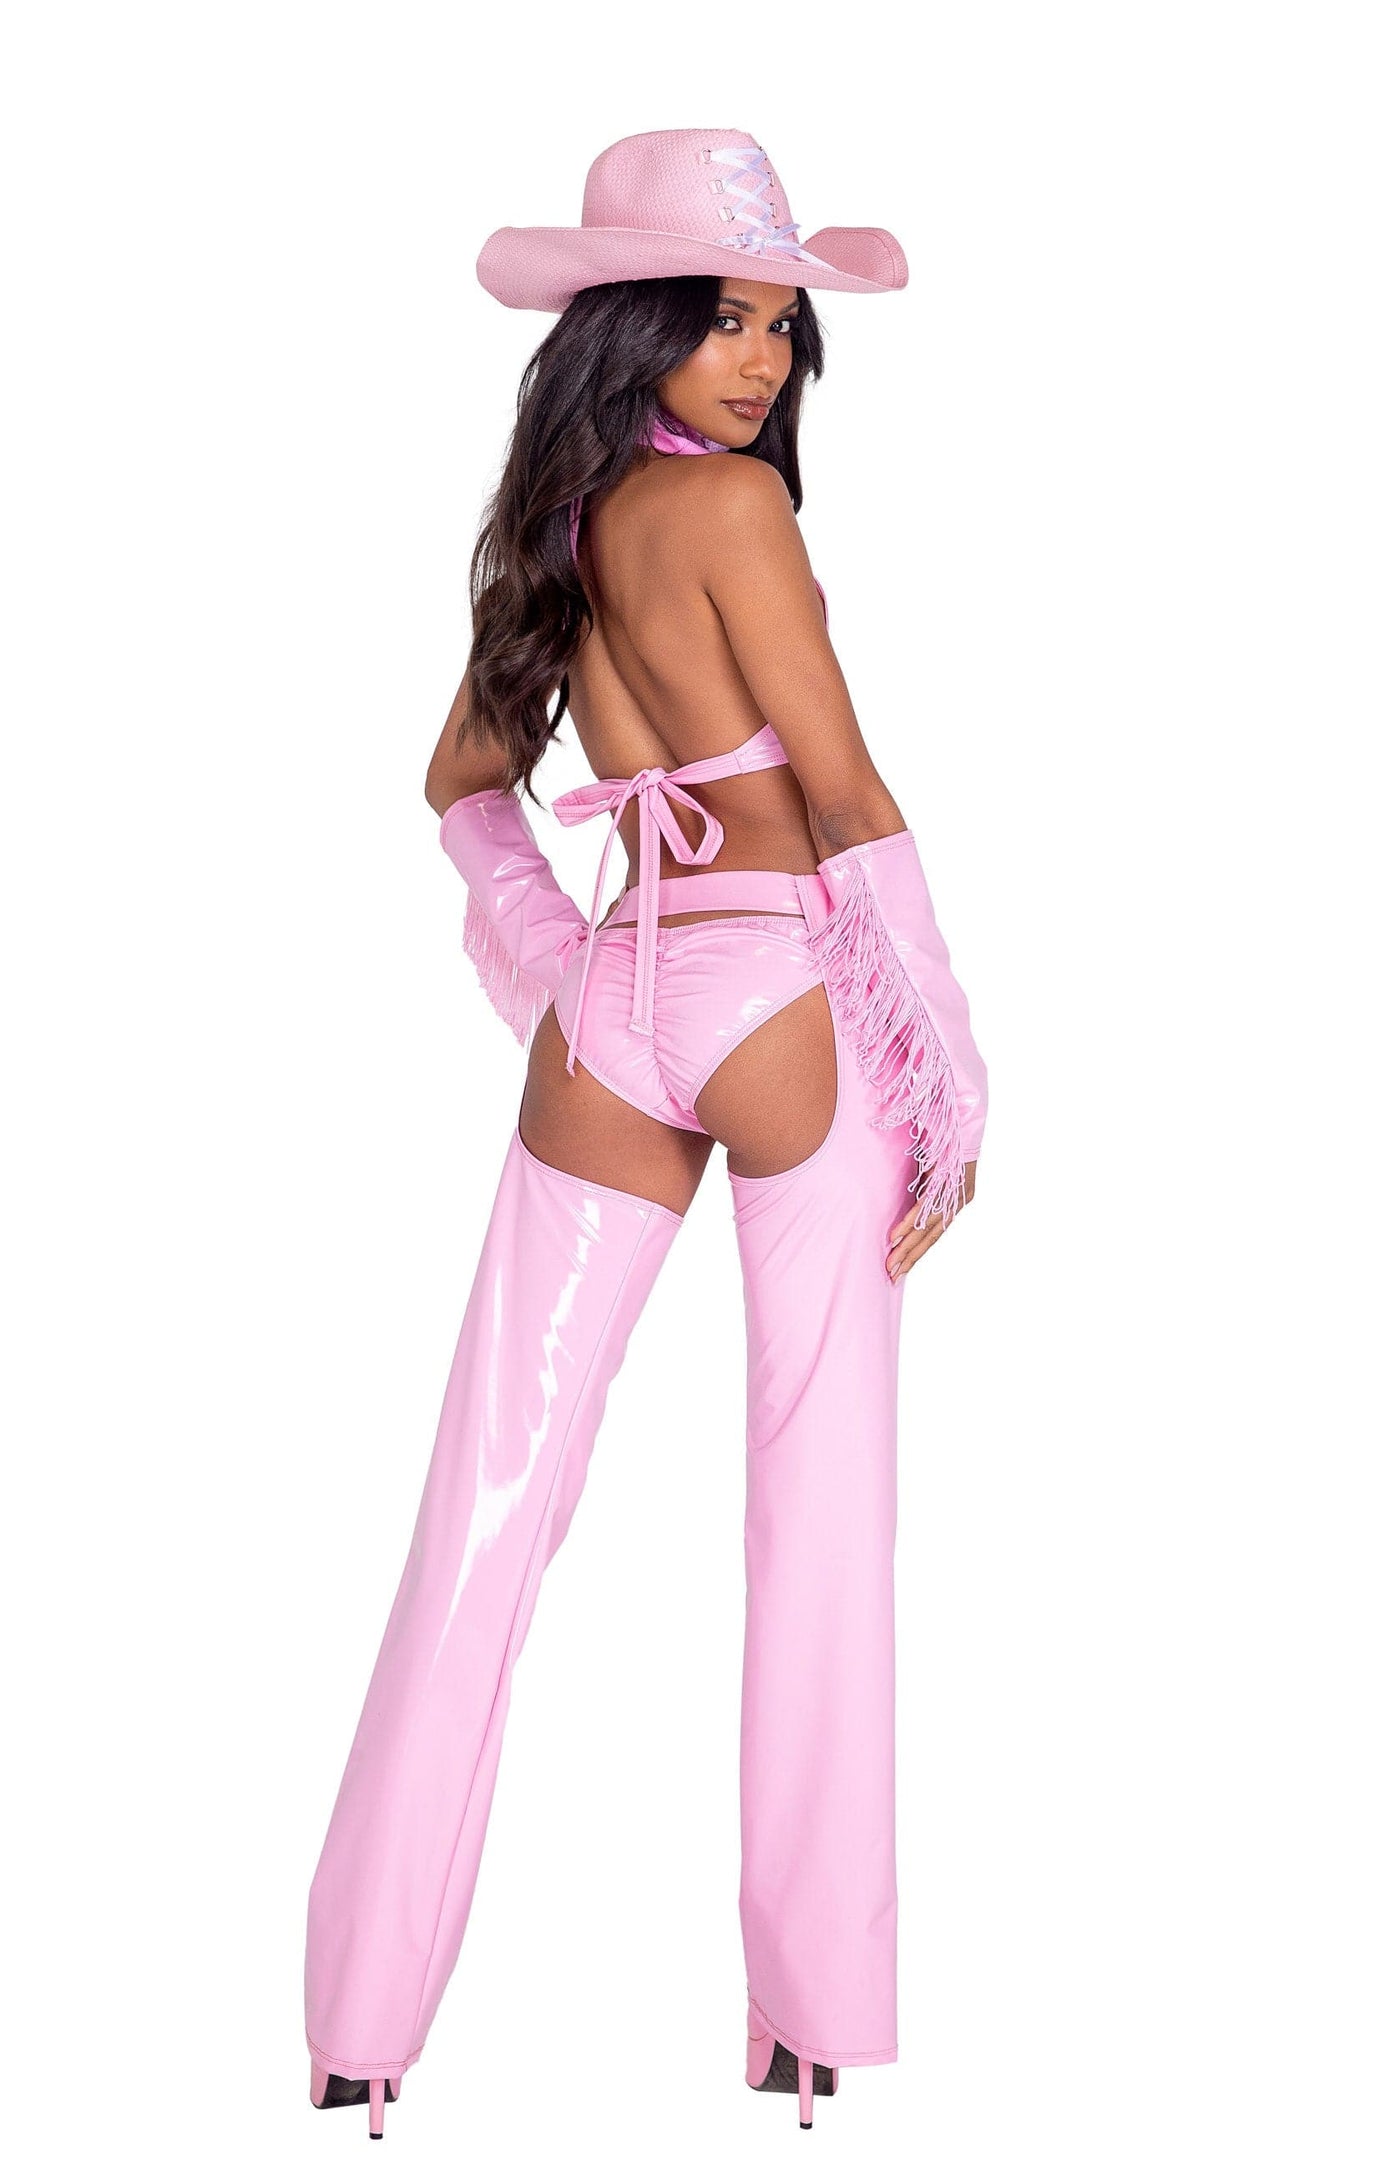 6pc. Sheriff Shine Cowgirl Women's Costume - For Love of Lingerie